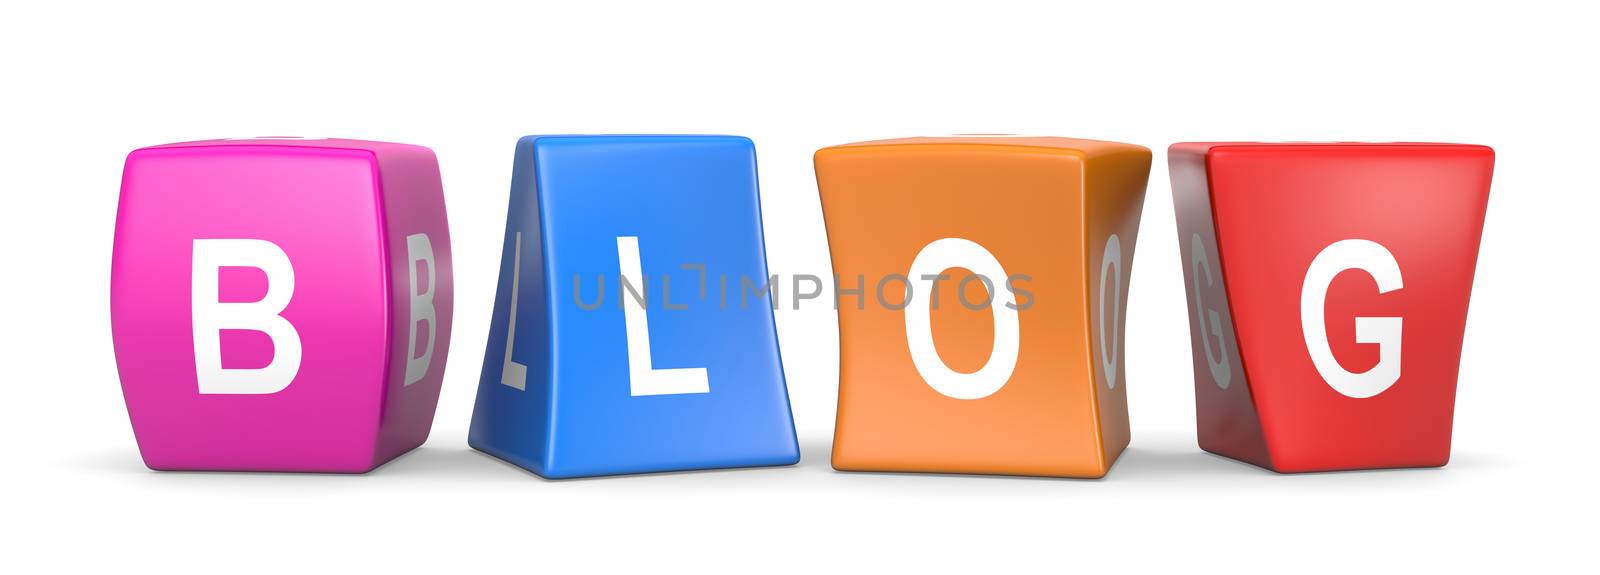 Blog White Text on Colorful Deformed Funny Cubes 3D Illustration on White Background